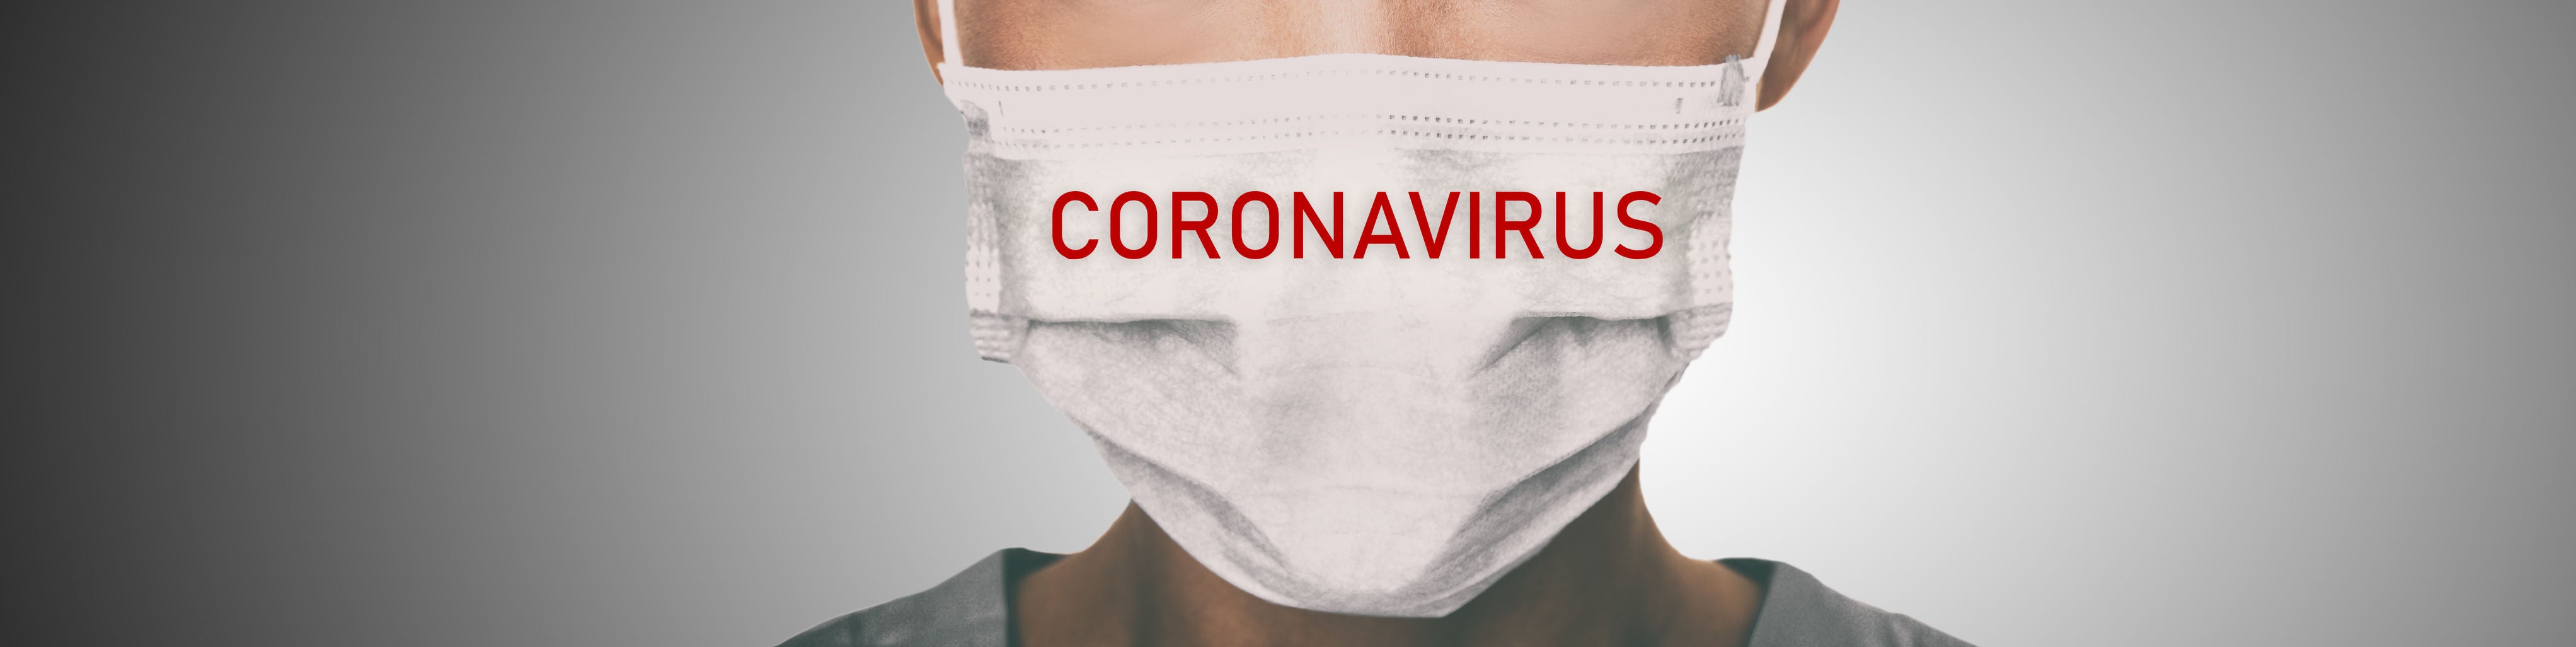 Best Approach to Disinfecting Surfaces with Cleaning Products to Fight Off New Coronavirus